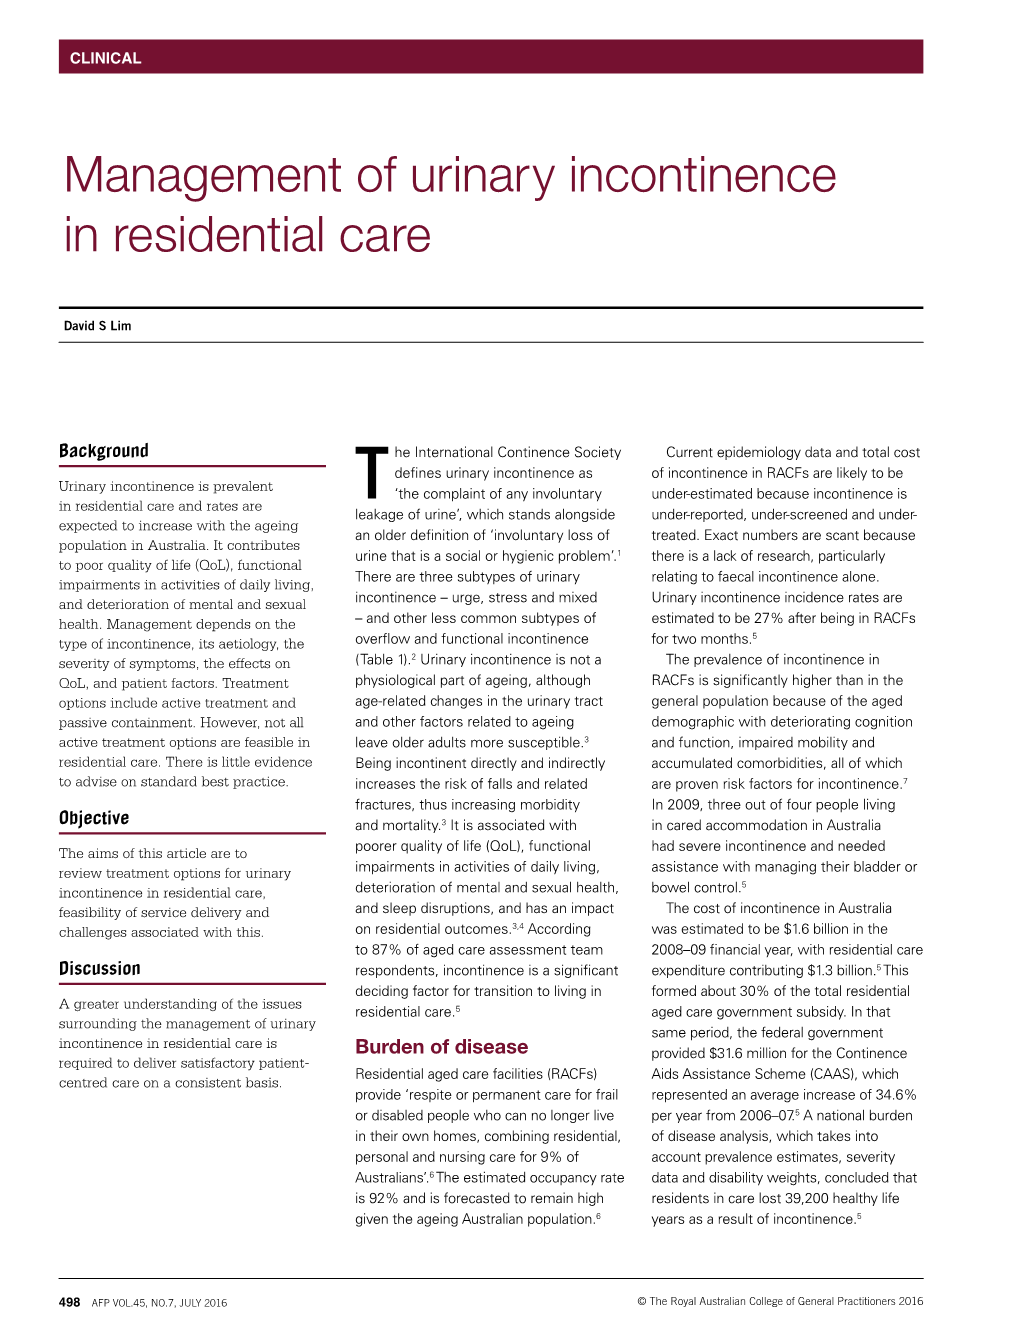 Management of Urinary Incontinence in Residential Care